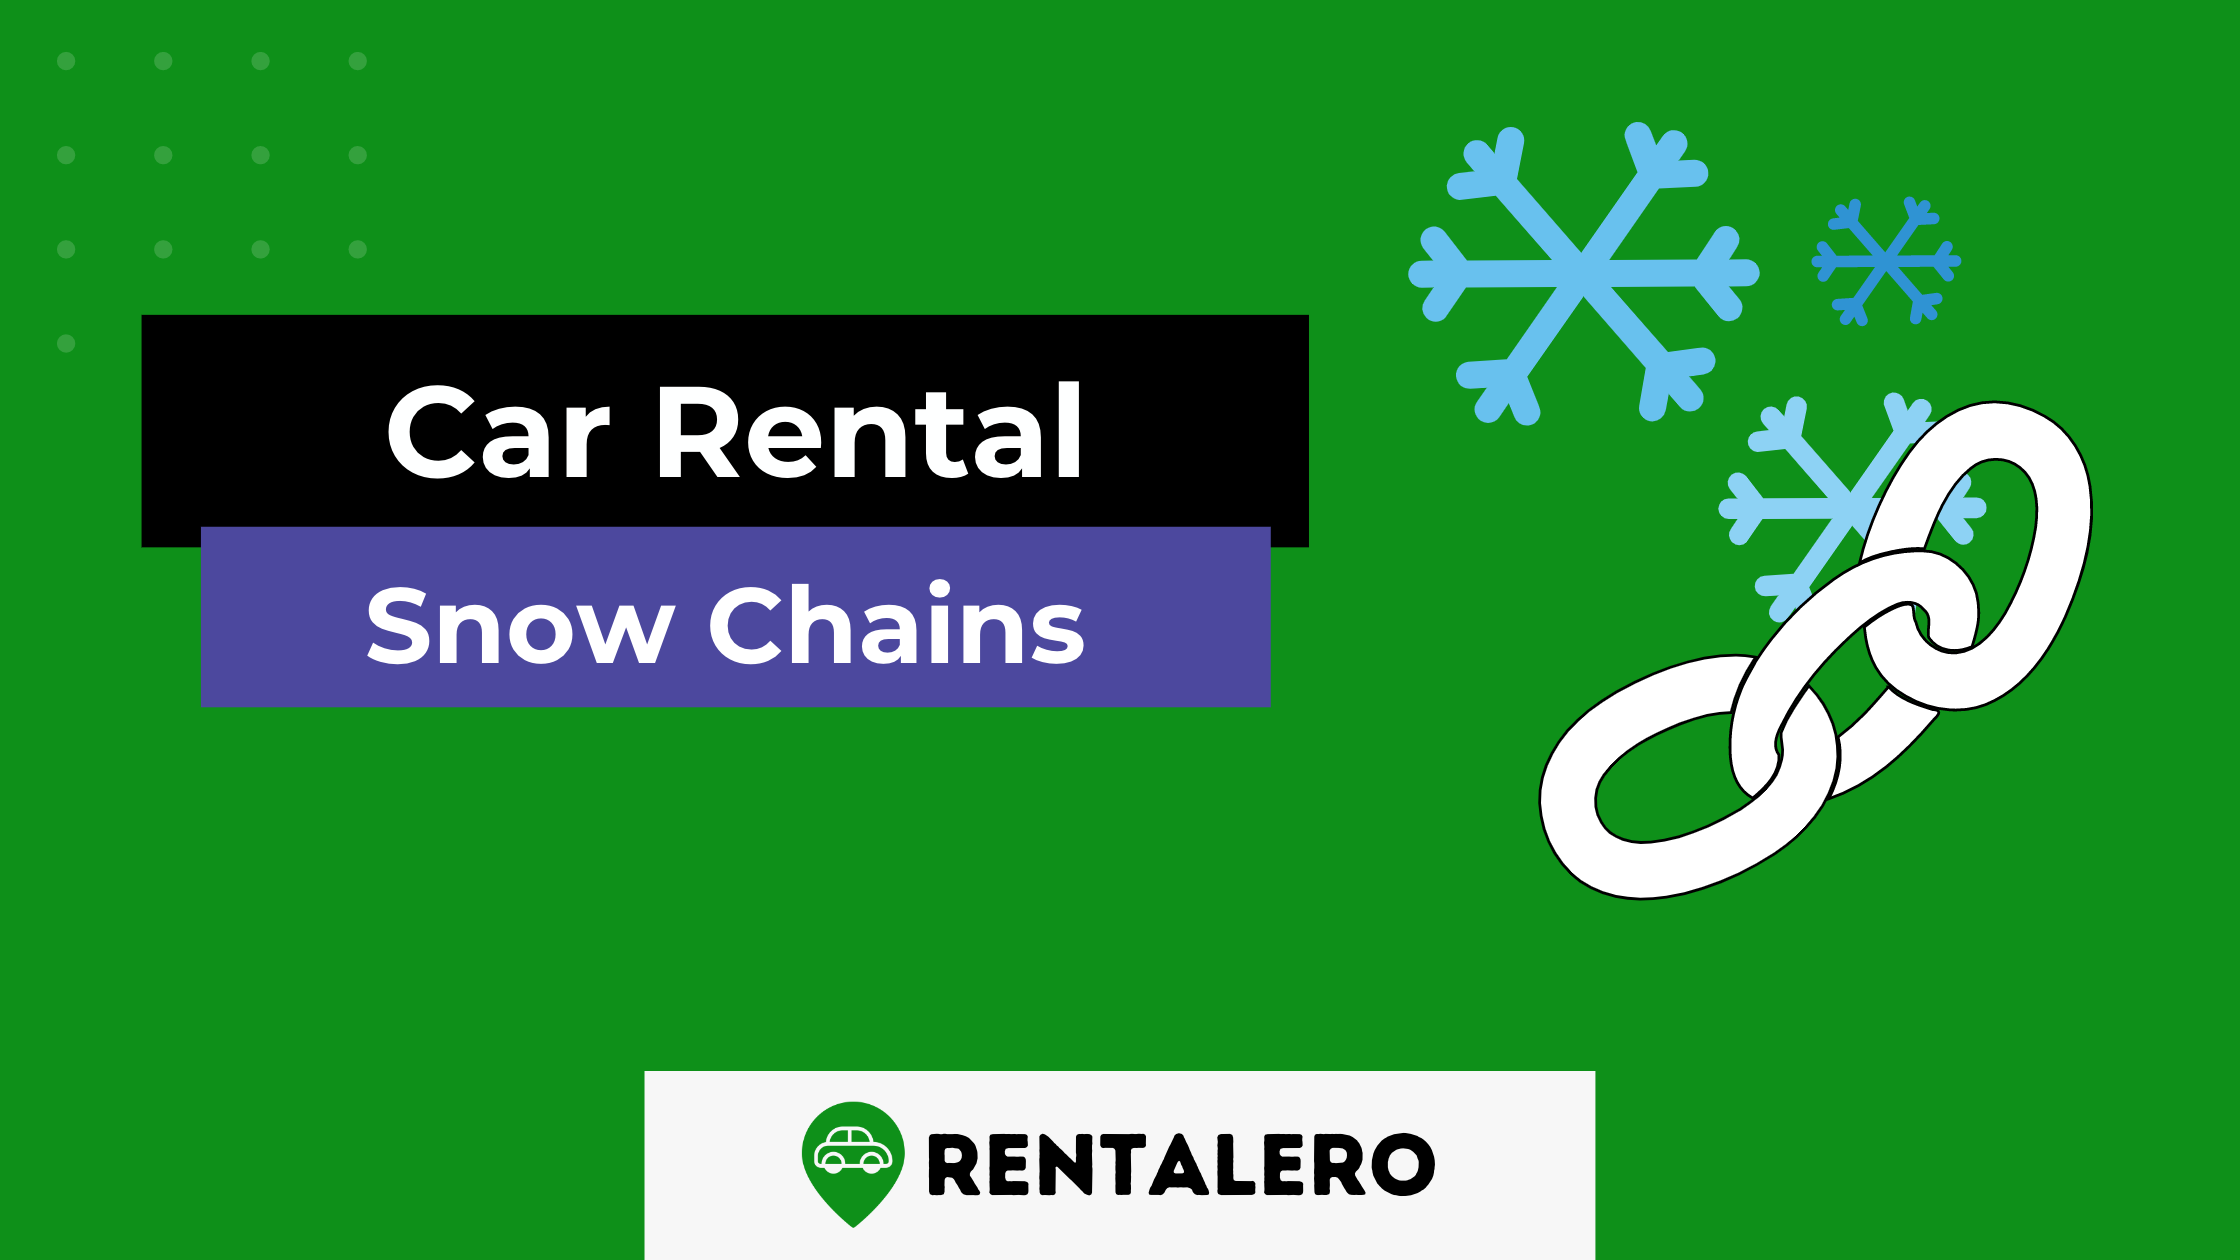 Do Car Rentals Have Snow Chains?